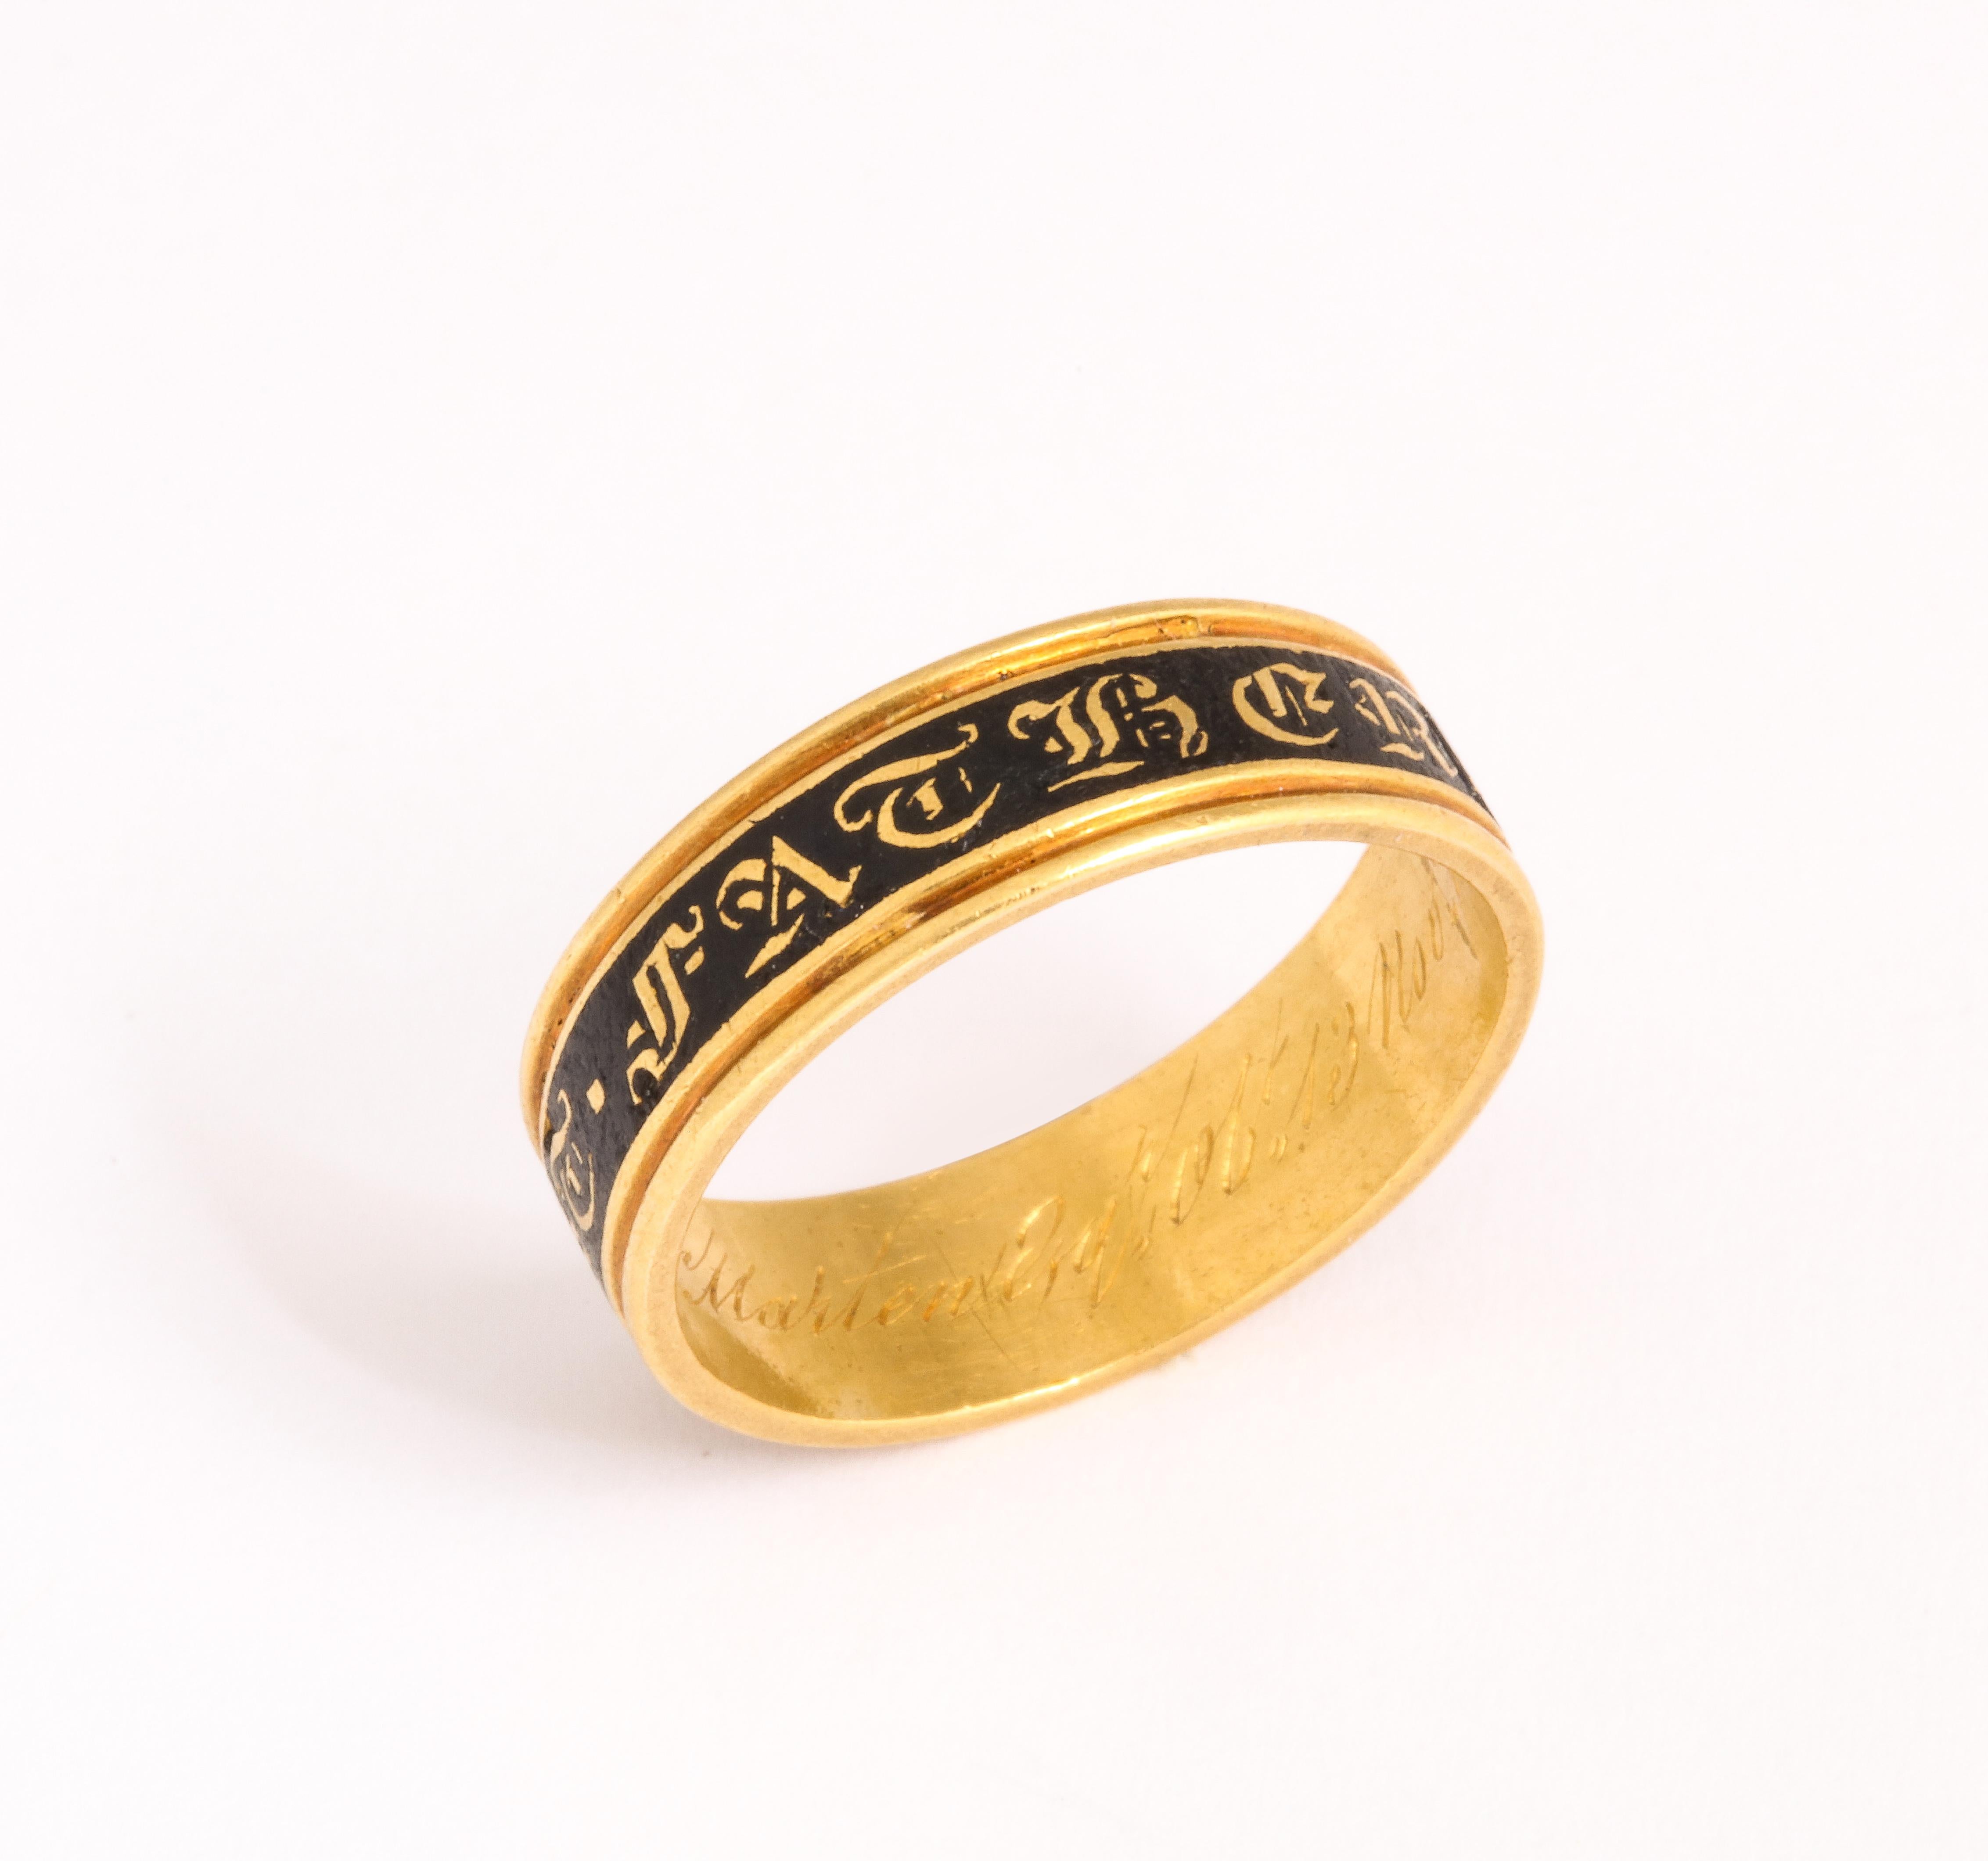 A Victorian Memorial Ring in 18 Kt gold struck home to me as it is a ring honoring the passing of 